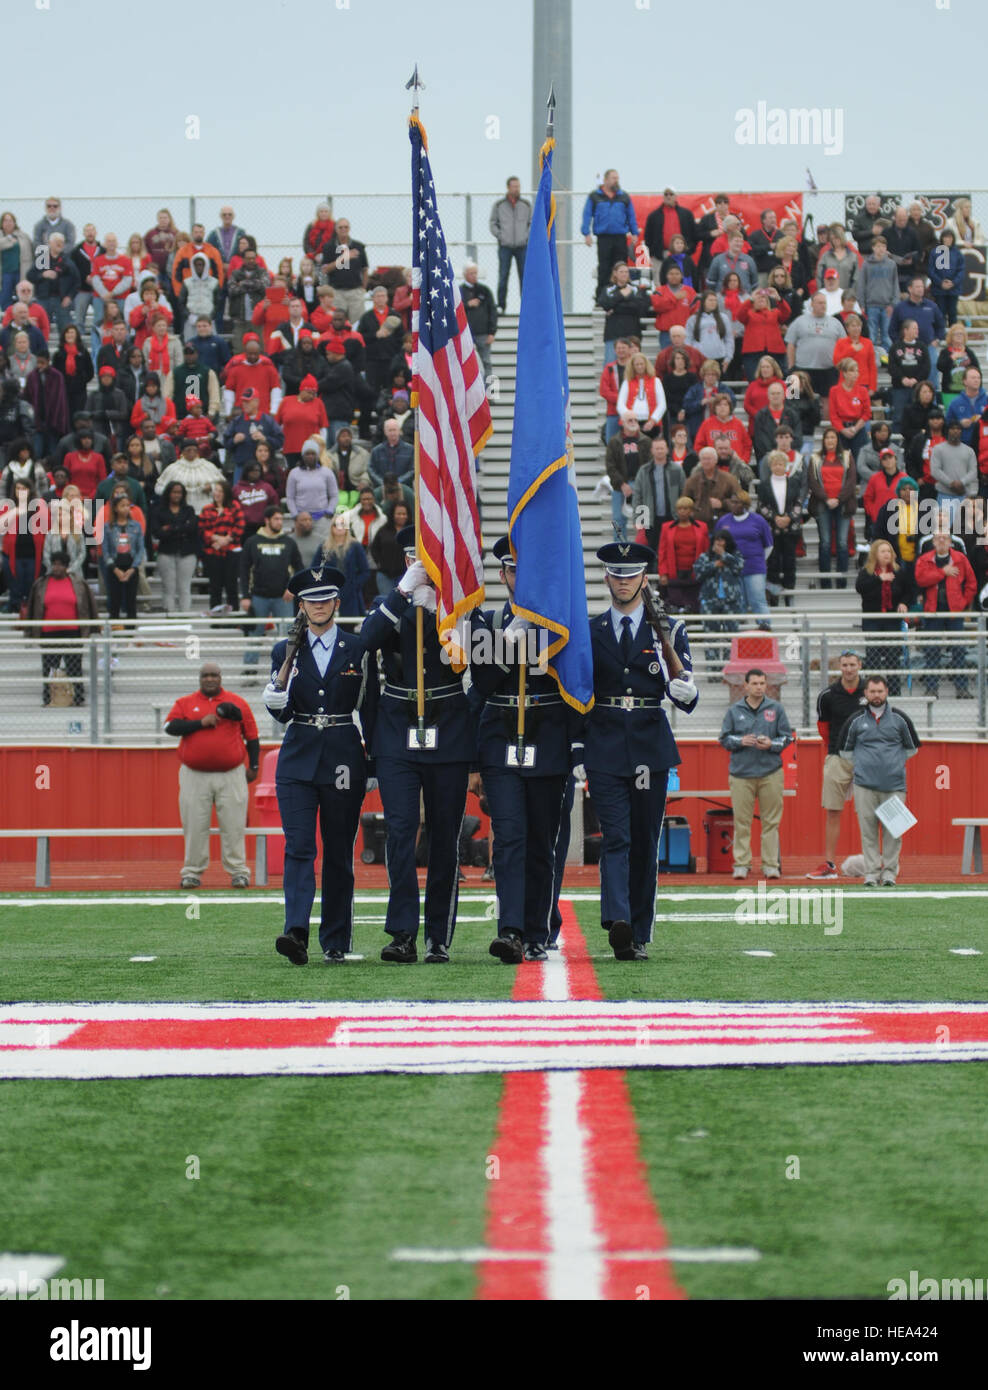 The Honor Guard with Keesler Air Force Base, Miss., marches onto the field in preparation of presenting the colors for the singing of the national anthem during a pregame celebration at the 2013 Mississippi Bowl at the Biloxi High School football stadium Dec. 8, 2013. Brig. Gen. Patrick Higby, 81st Training Wing commander, and Airmen carrying the 50 state flags also participated in the pregame celebration.  Kemberly Groue Stock Photo